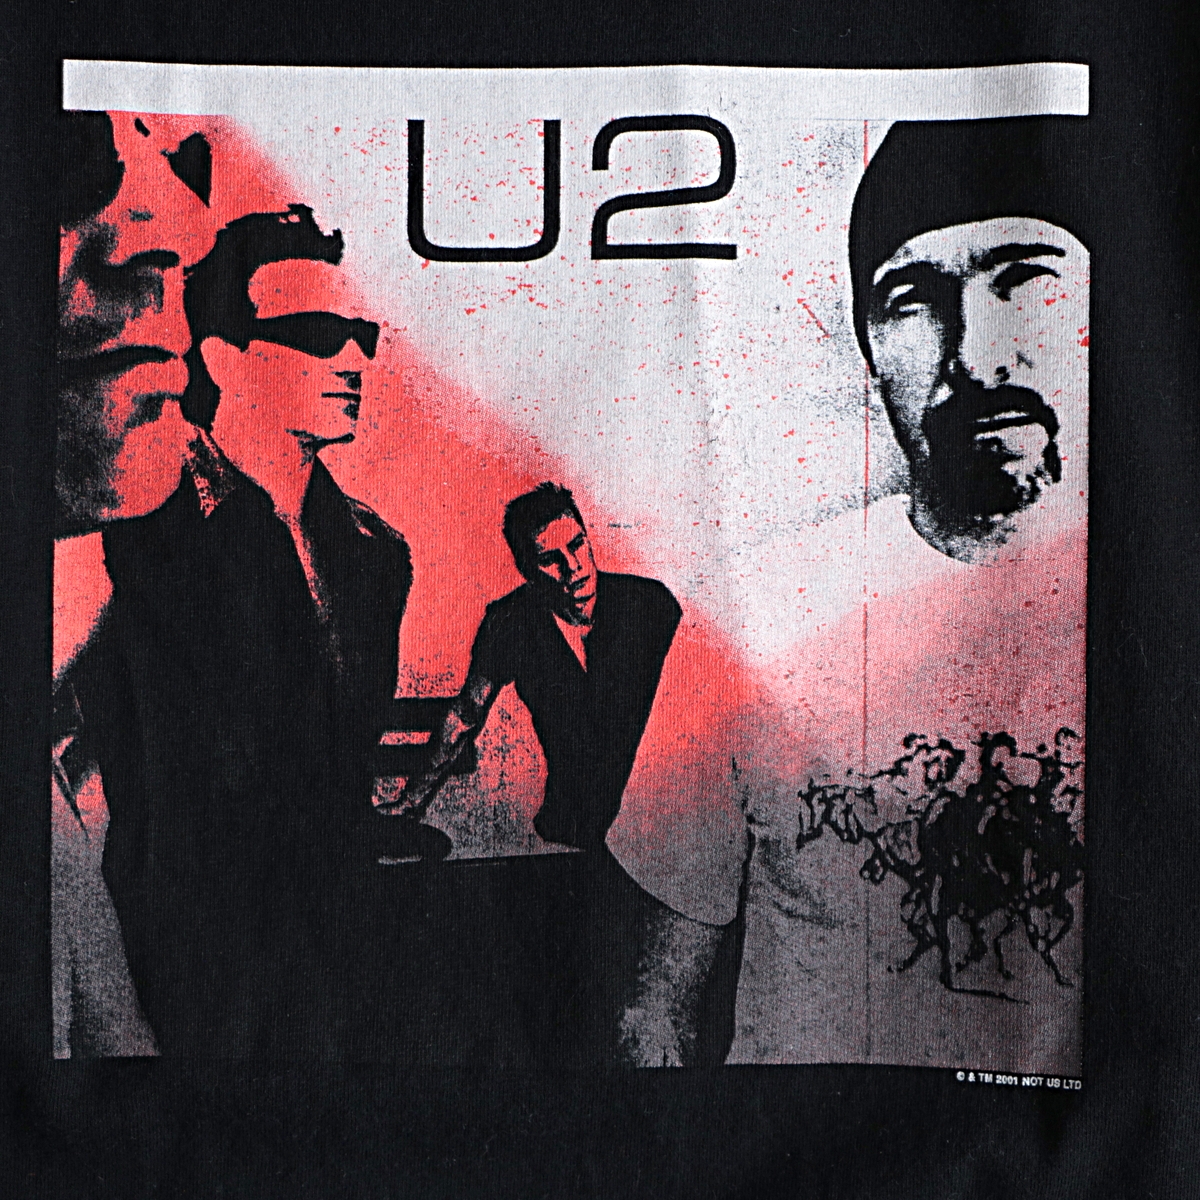 00s U2 「The Goal Is Elevation」ツアー ロック バンド Tシャツ usa製